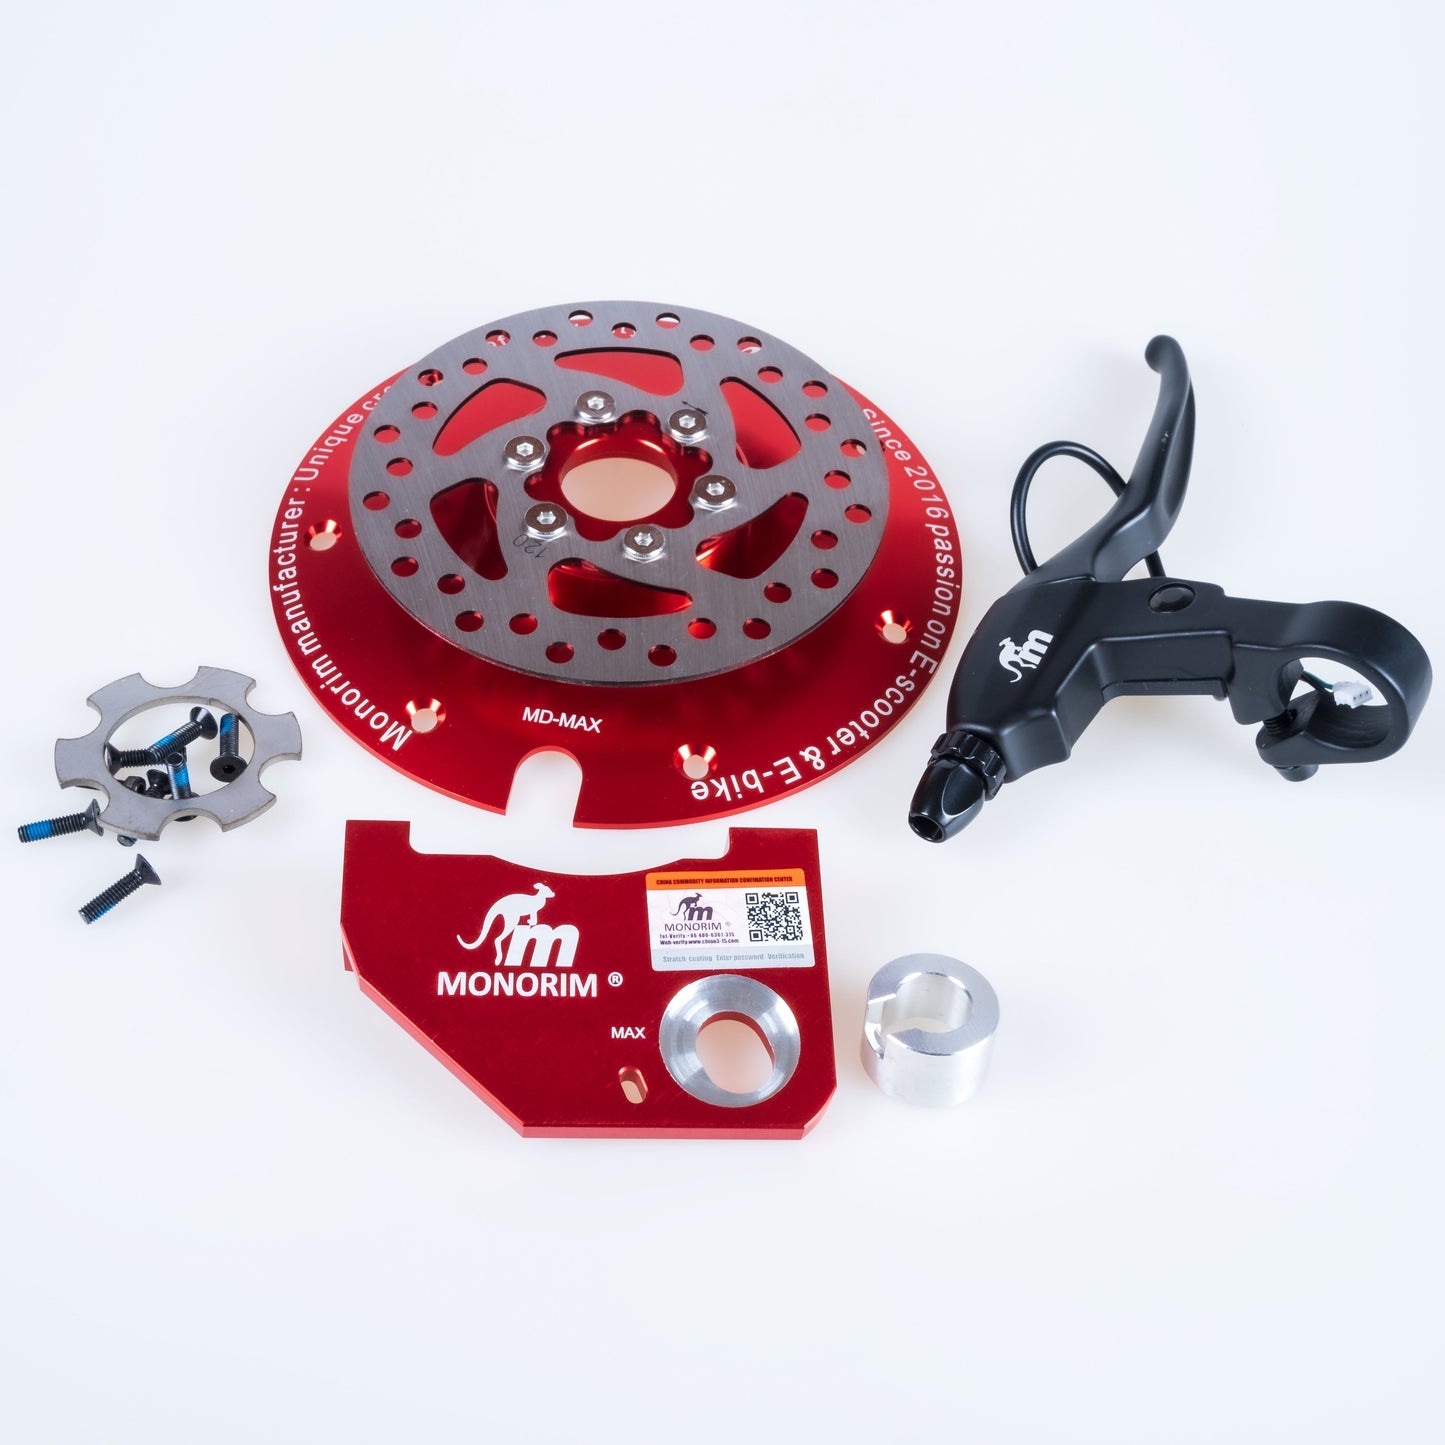 Monorim MD-MAX Motor Deck Upgrade Disc Brake Parts For Segway Ninebot Scooter MAX G30 , 120mm for Rear Motor